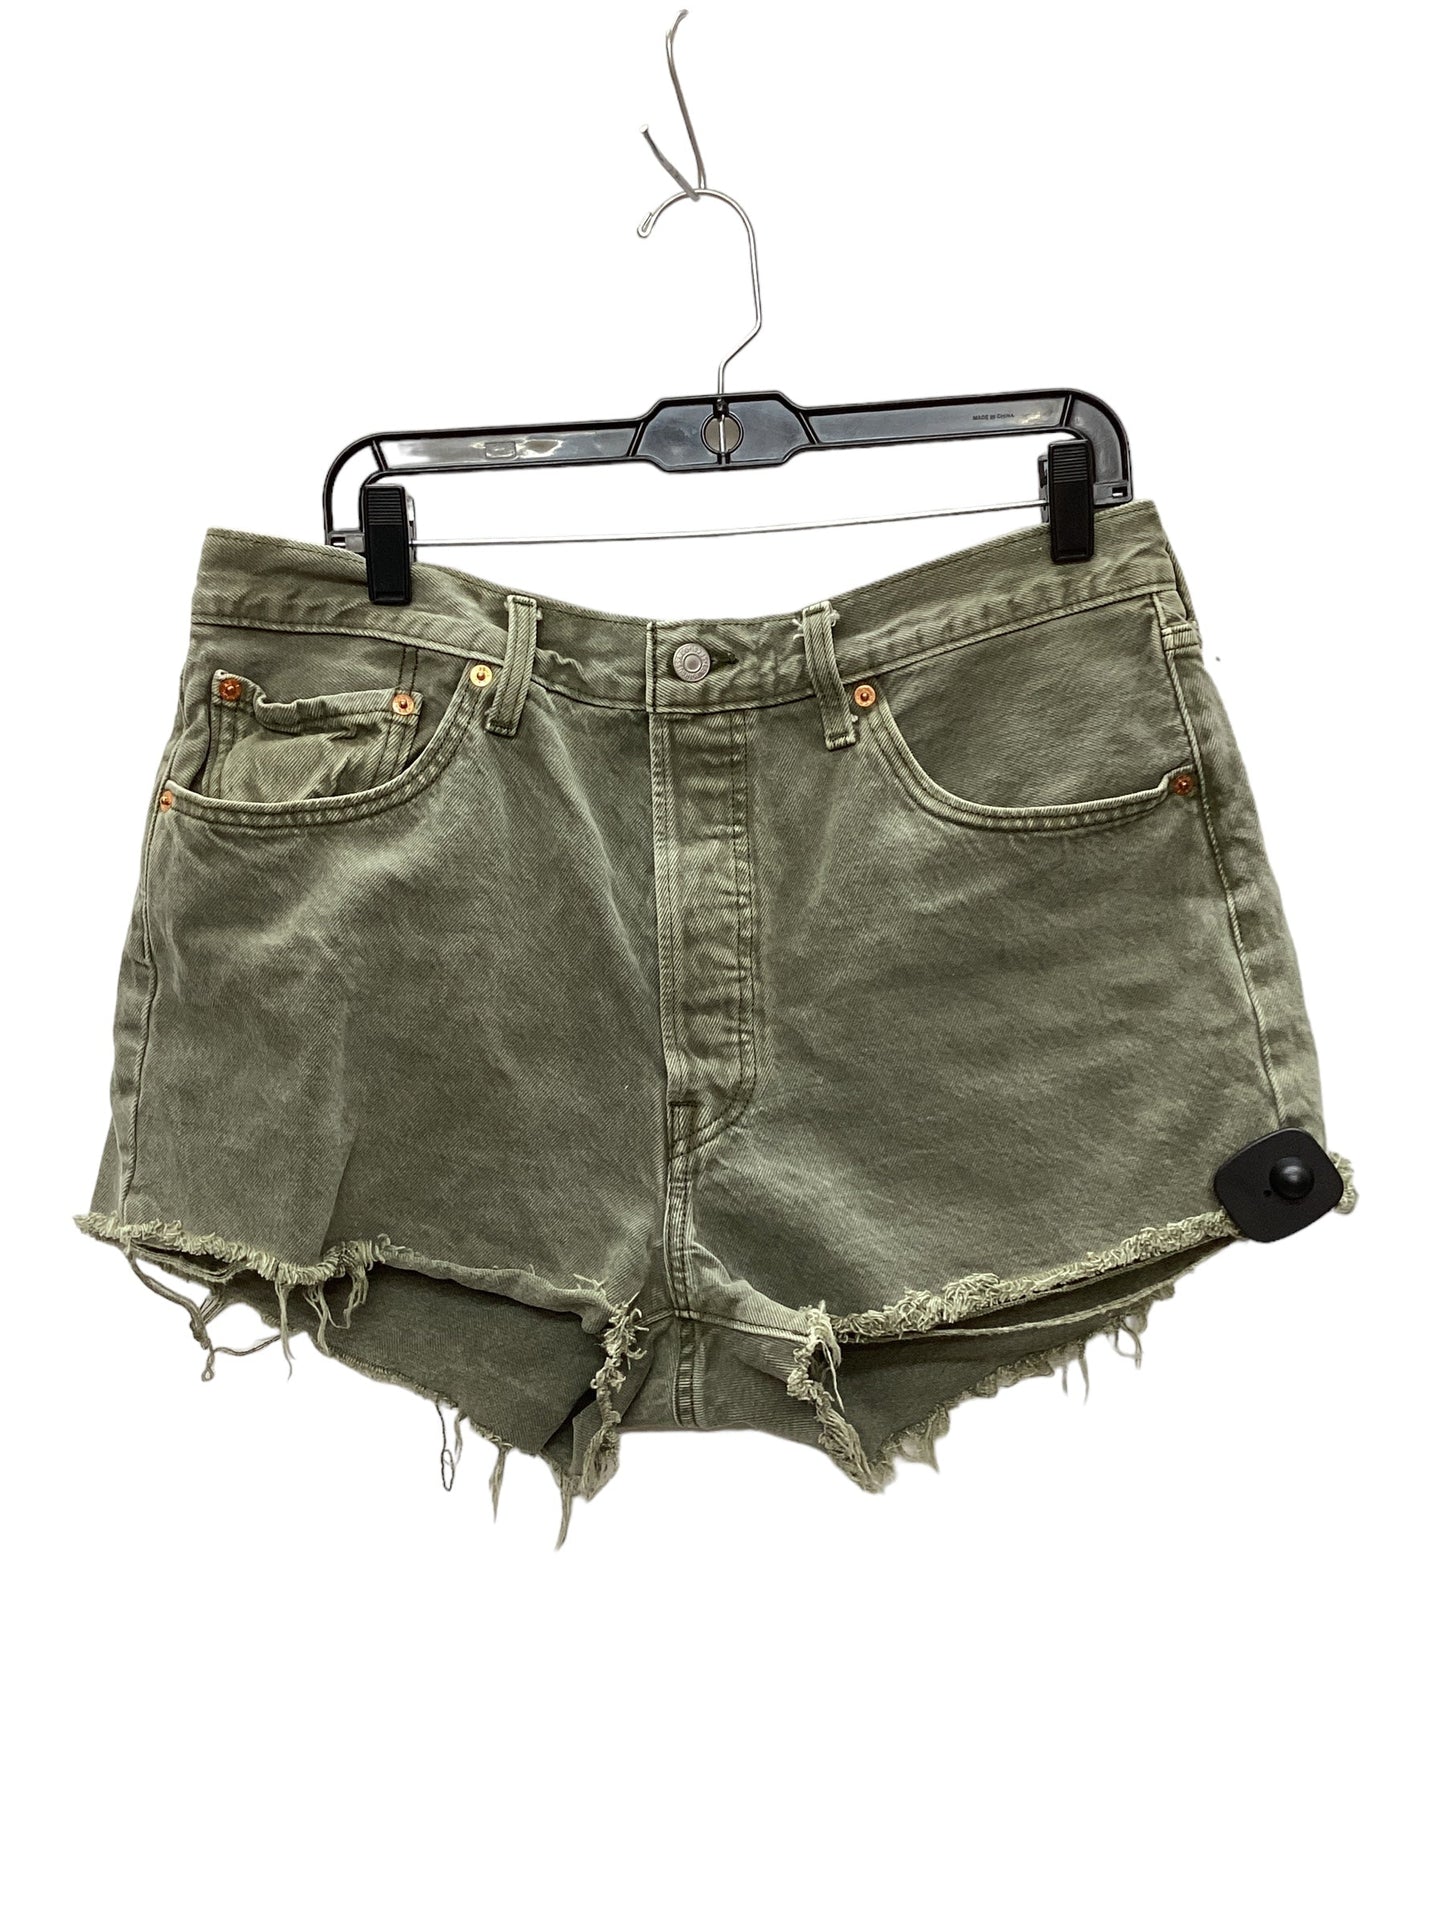 Green Shorts Levis, Size 18